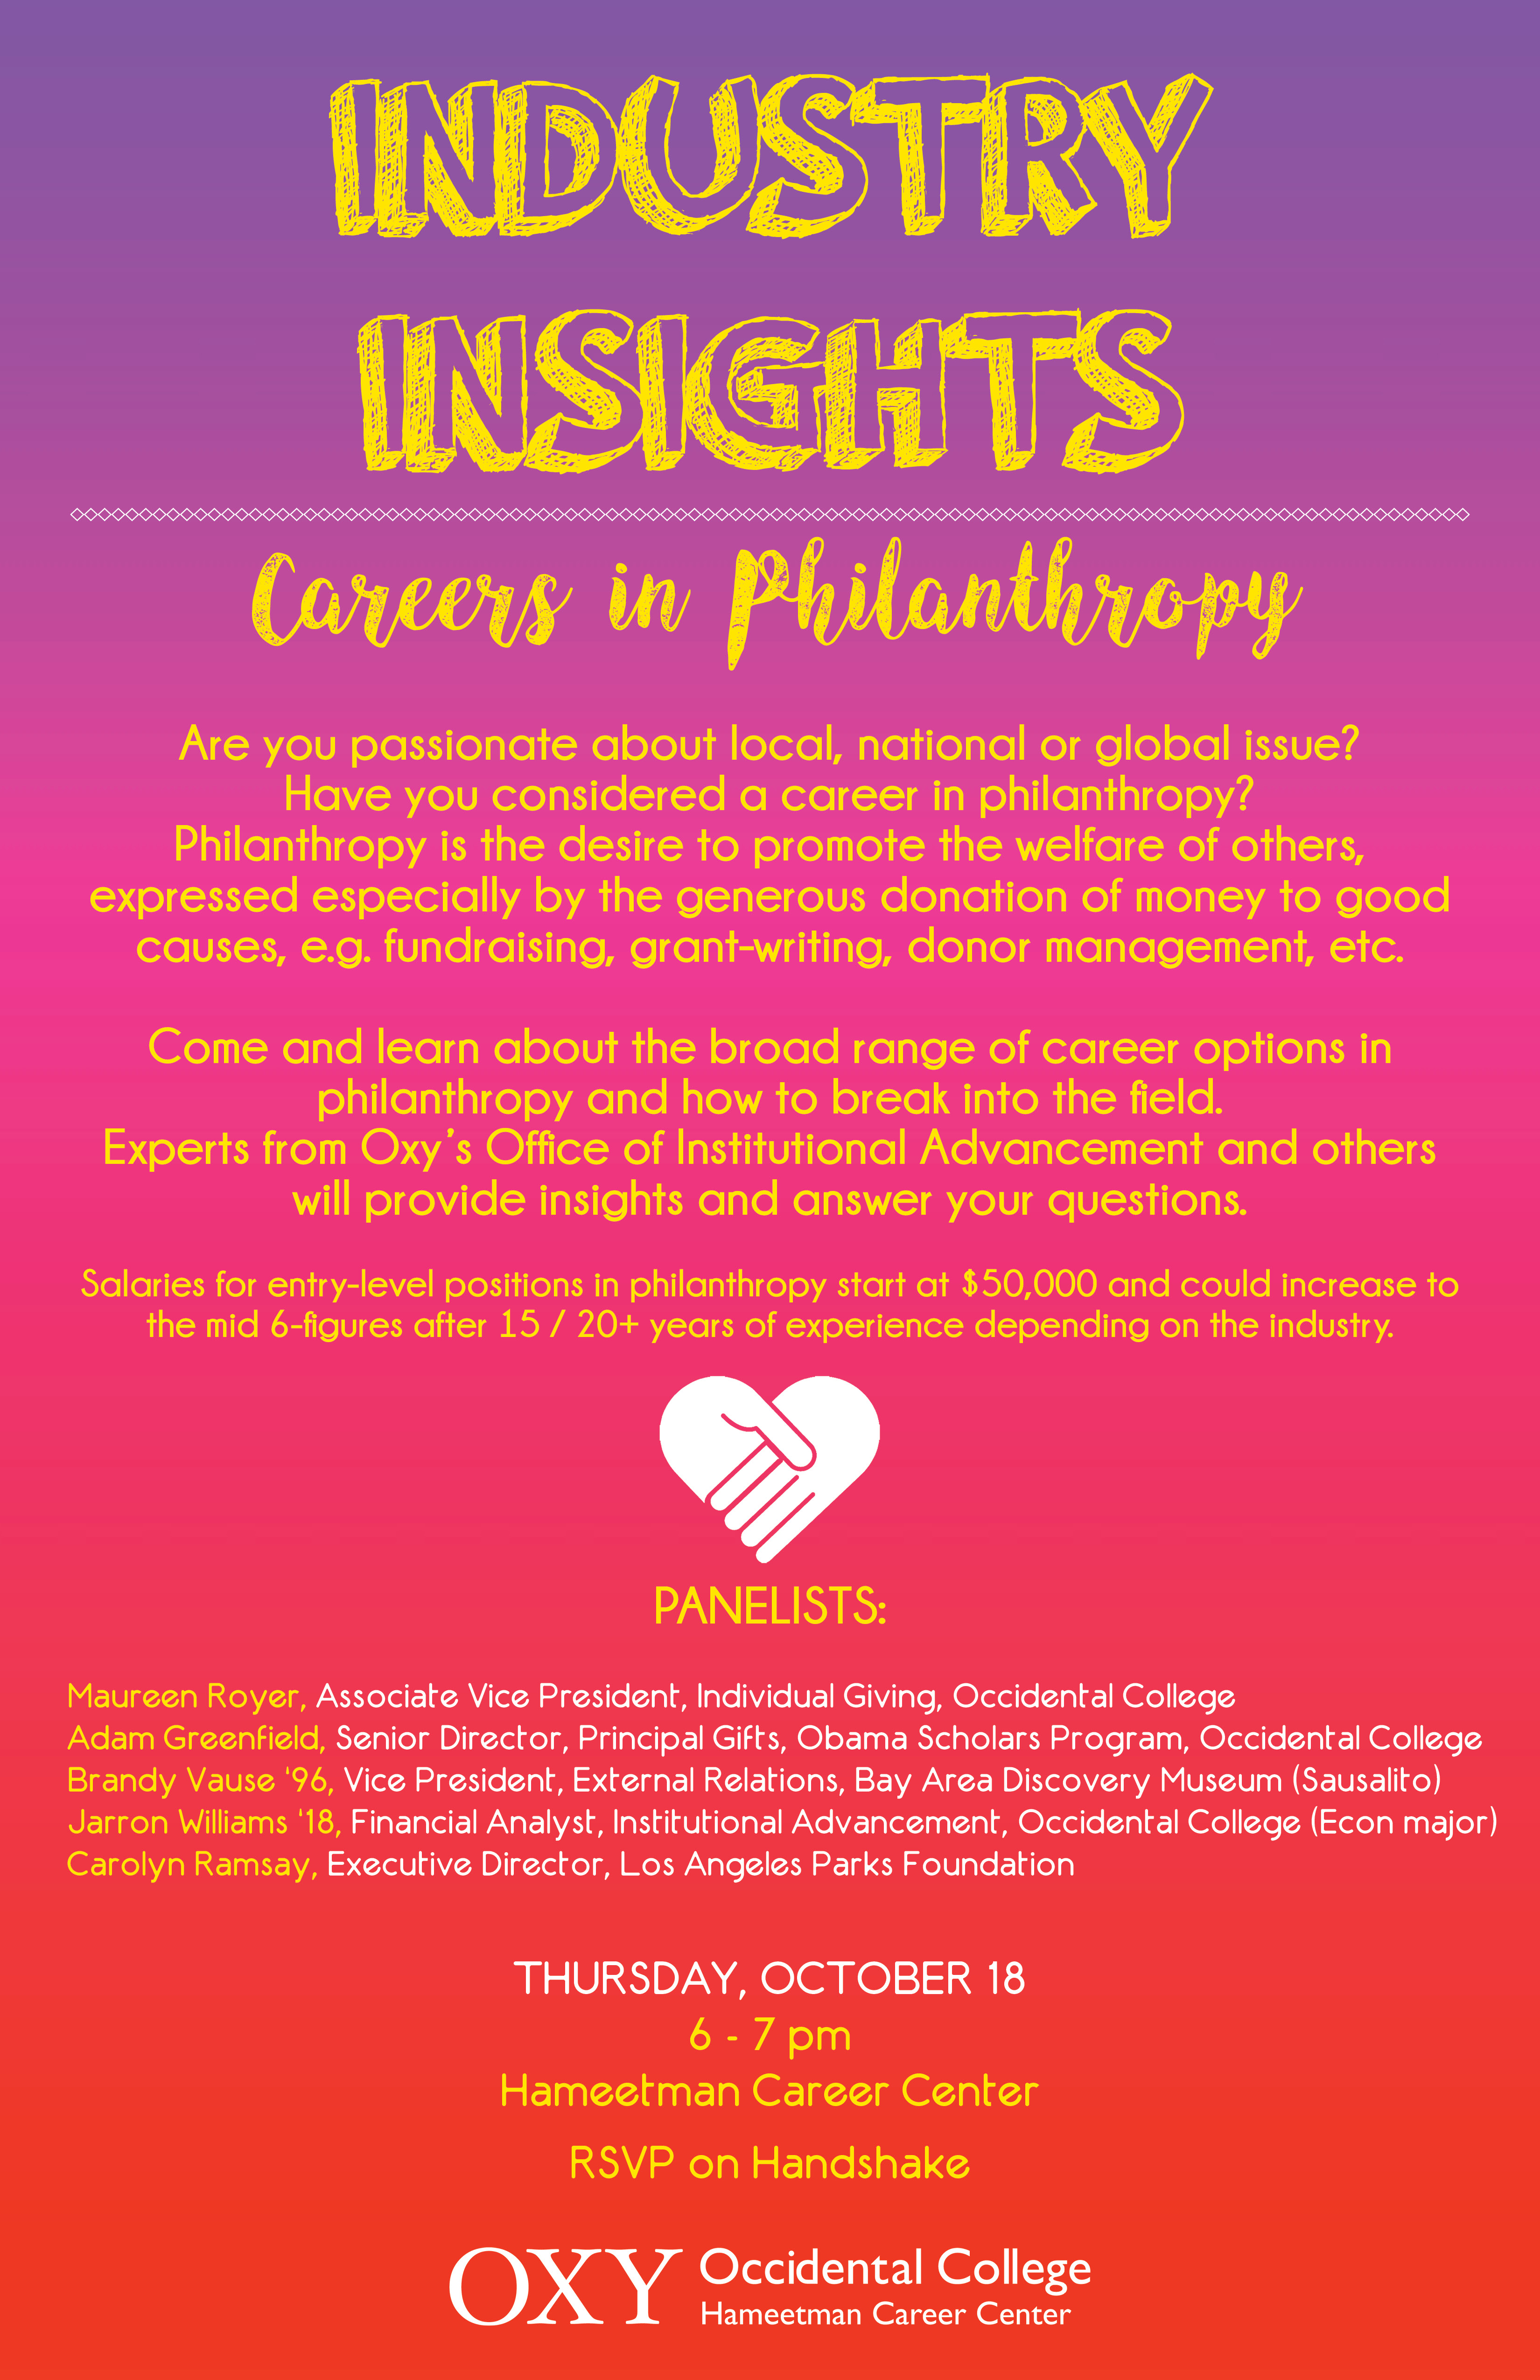 Image for Industry Insights: Careers in Philanthropy Event